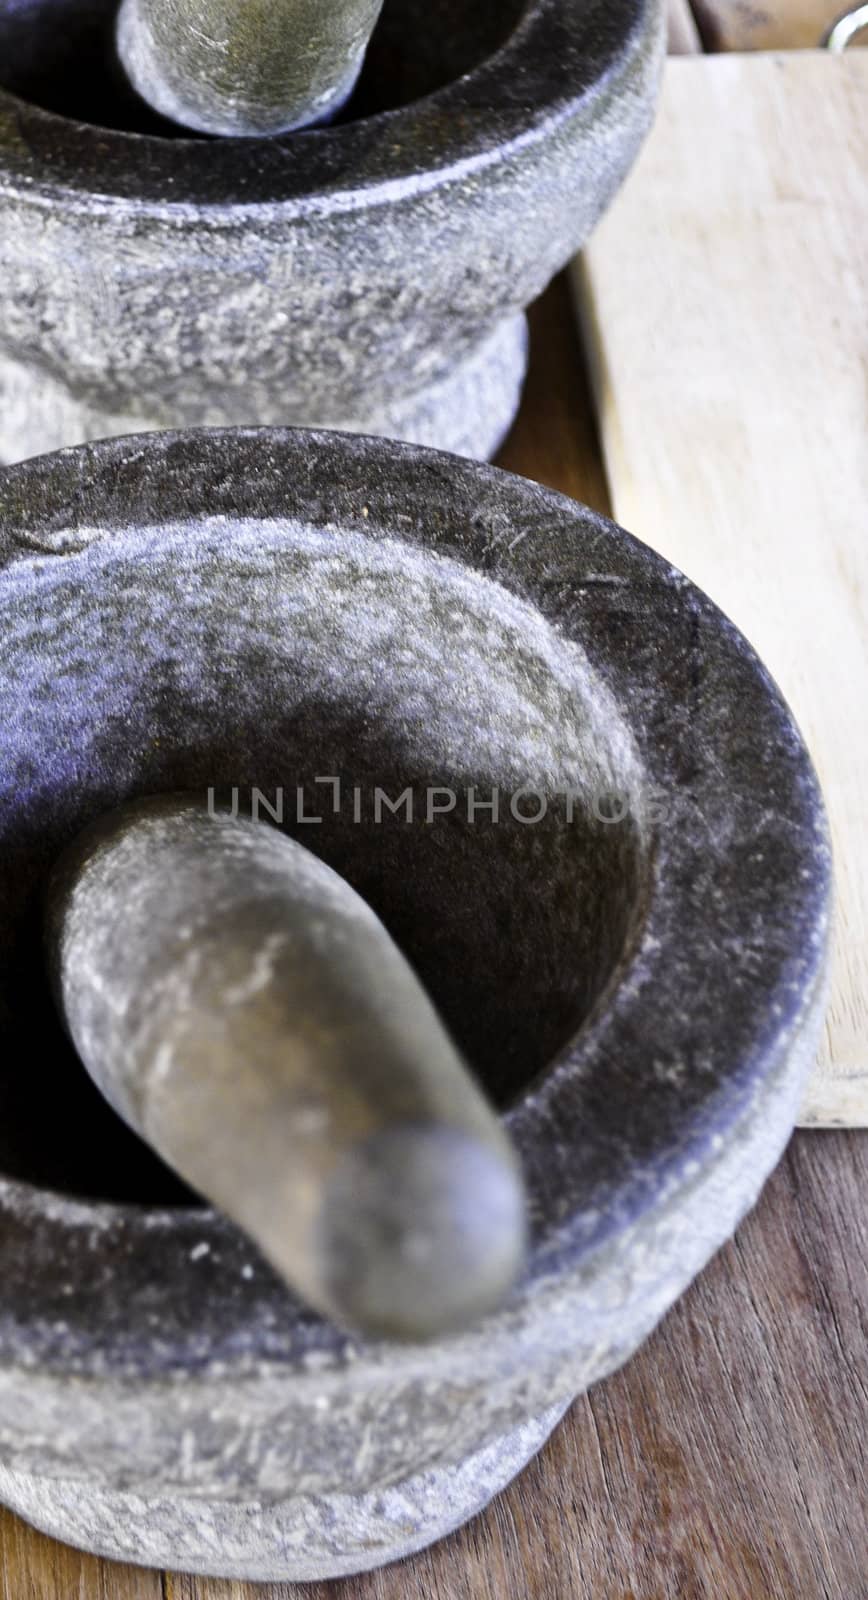 Two stone mortars and pestle used to grind spices in Thailand